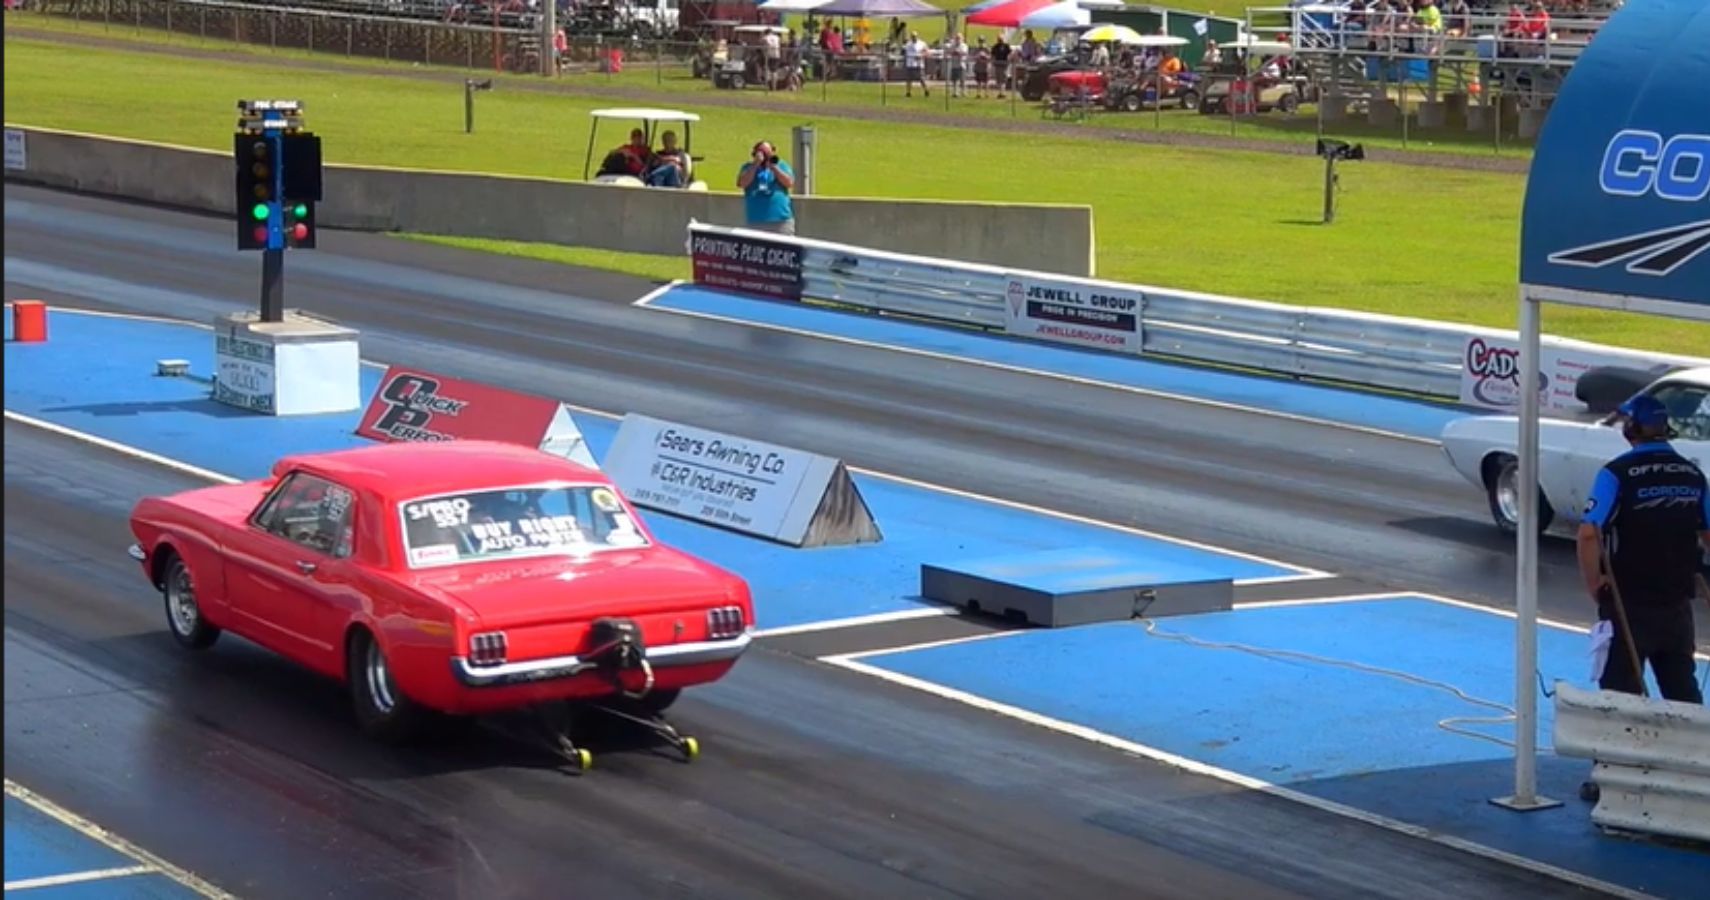 Check Out Some Good Ol' American Muscle Car Drag Racing At Cordova Dragway